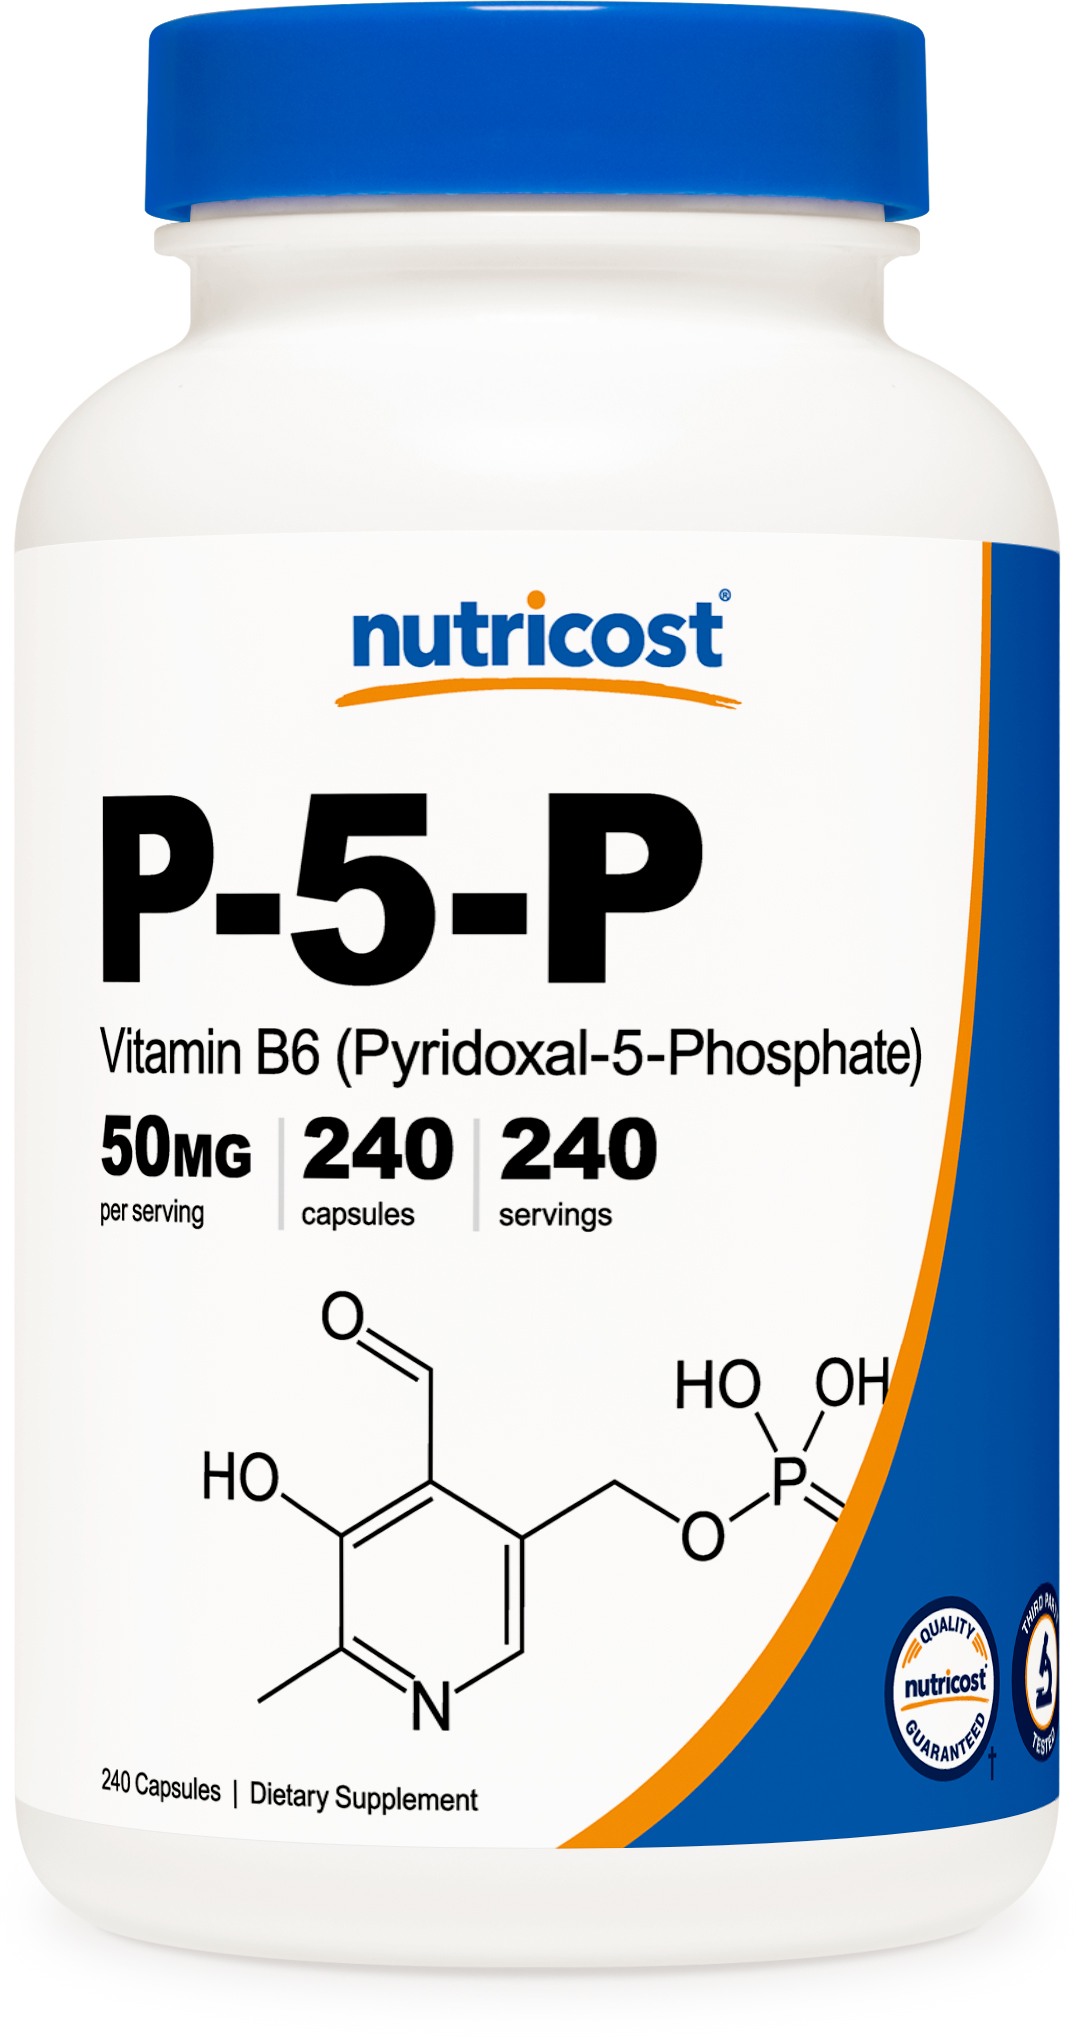 nutricost p5p 50mg 240 capsules bottle